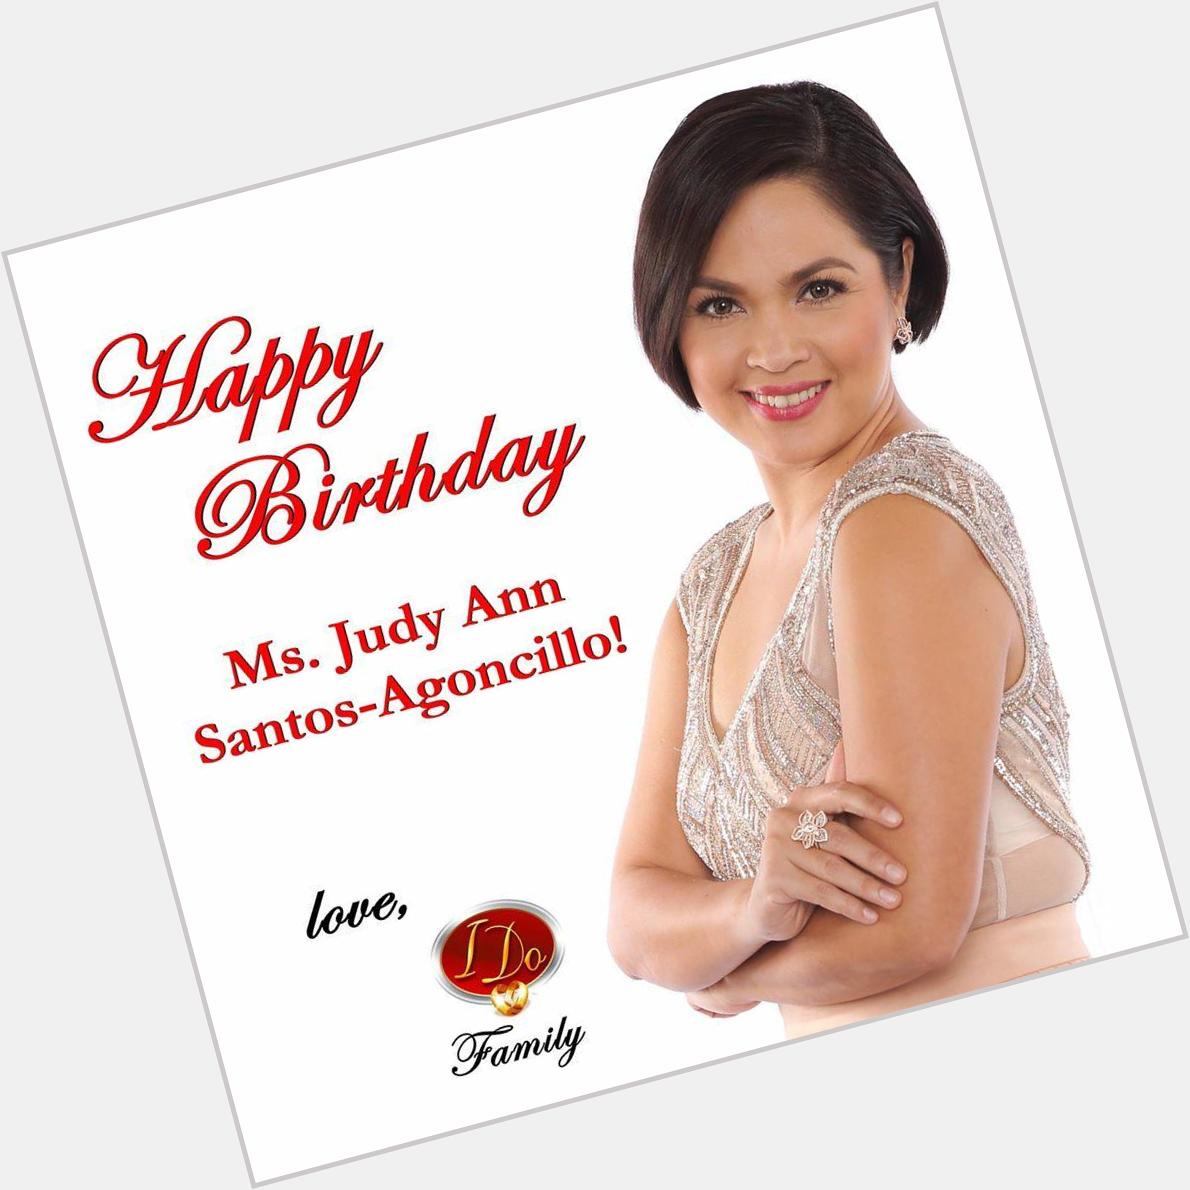 Happy birthday to our lovely host, Ms. Judy Ann Santos-Agoncillo! Your I DO Family loves you! 